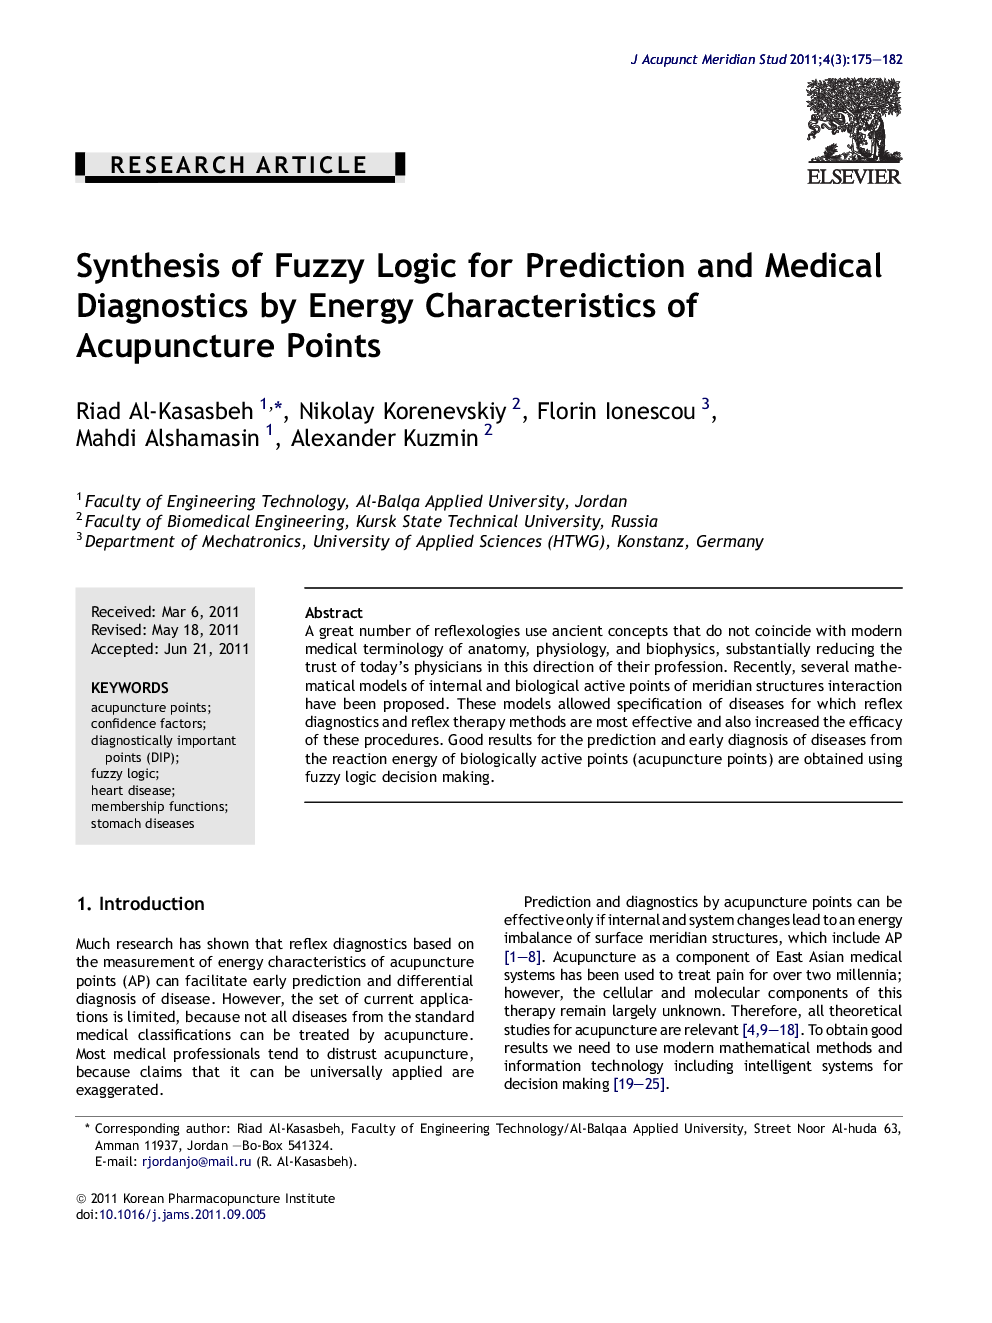 Synthesis of Fuzzy Logic for Prediction and Medical Diagnostics by Energy Characteristics of Acupuncture Points